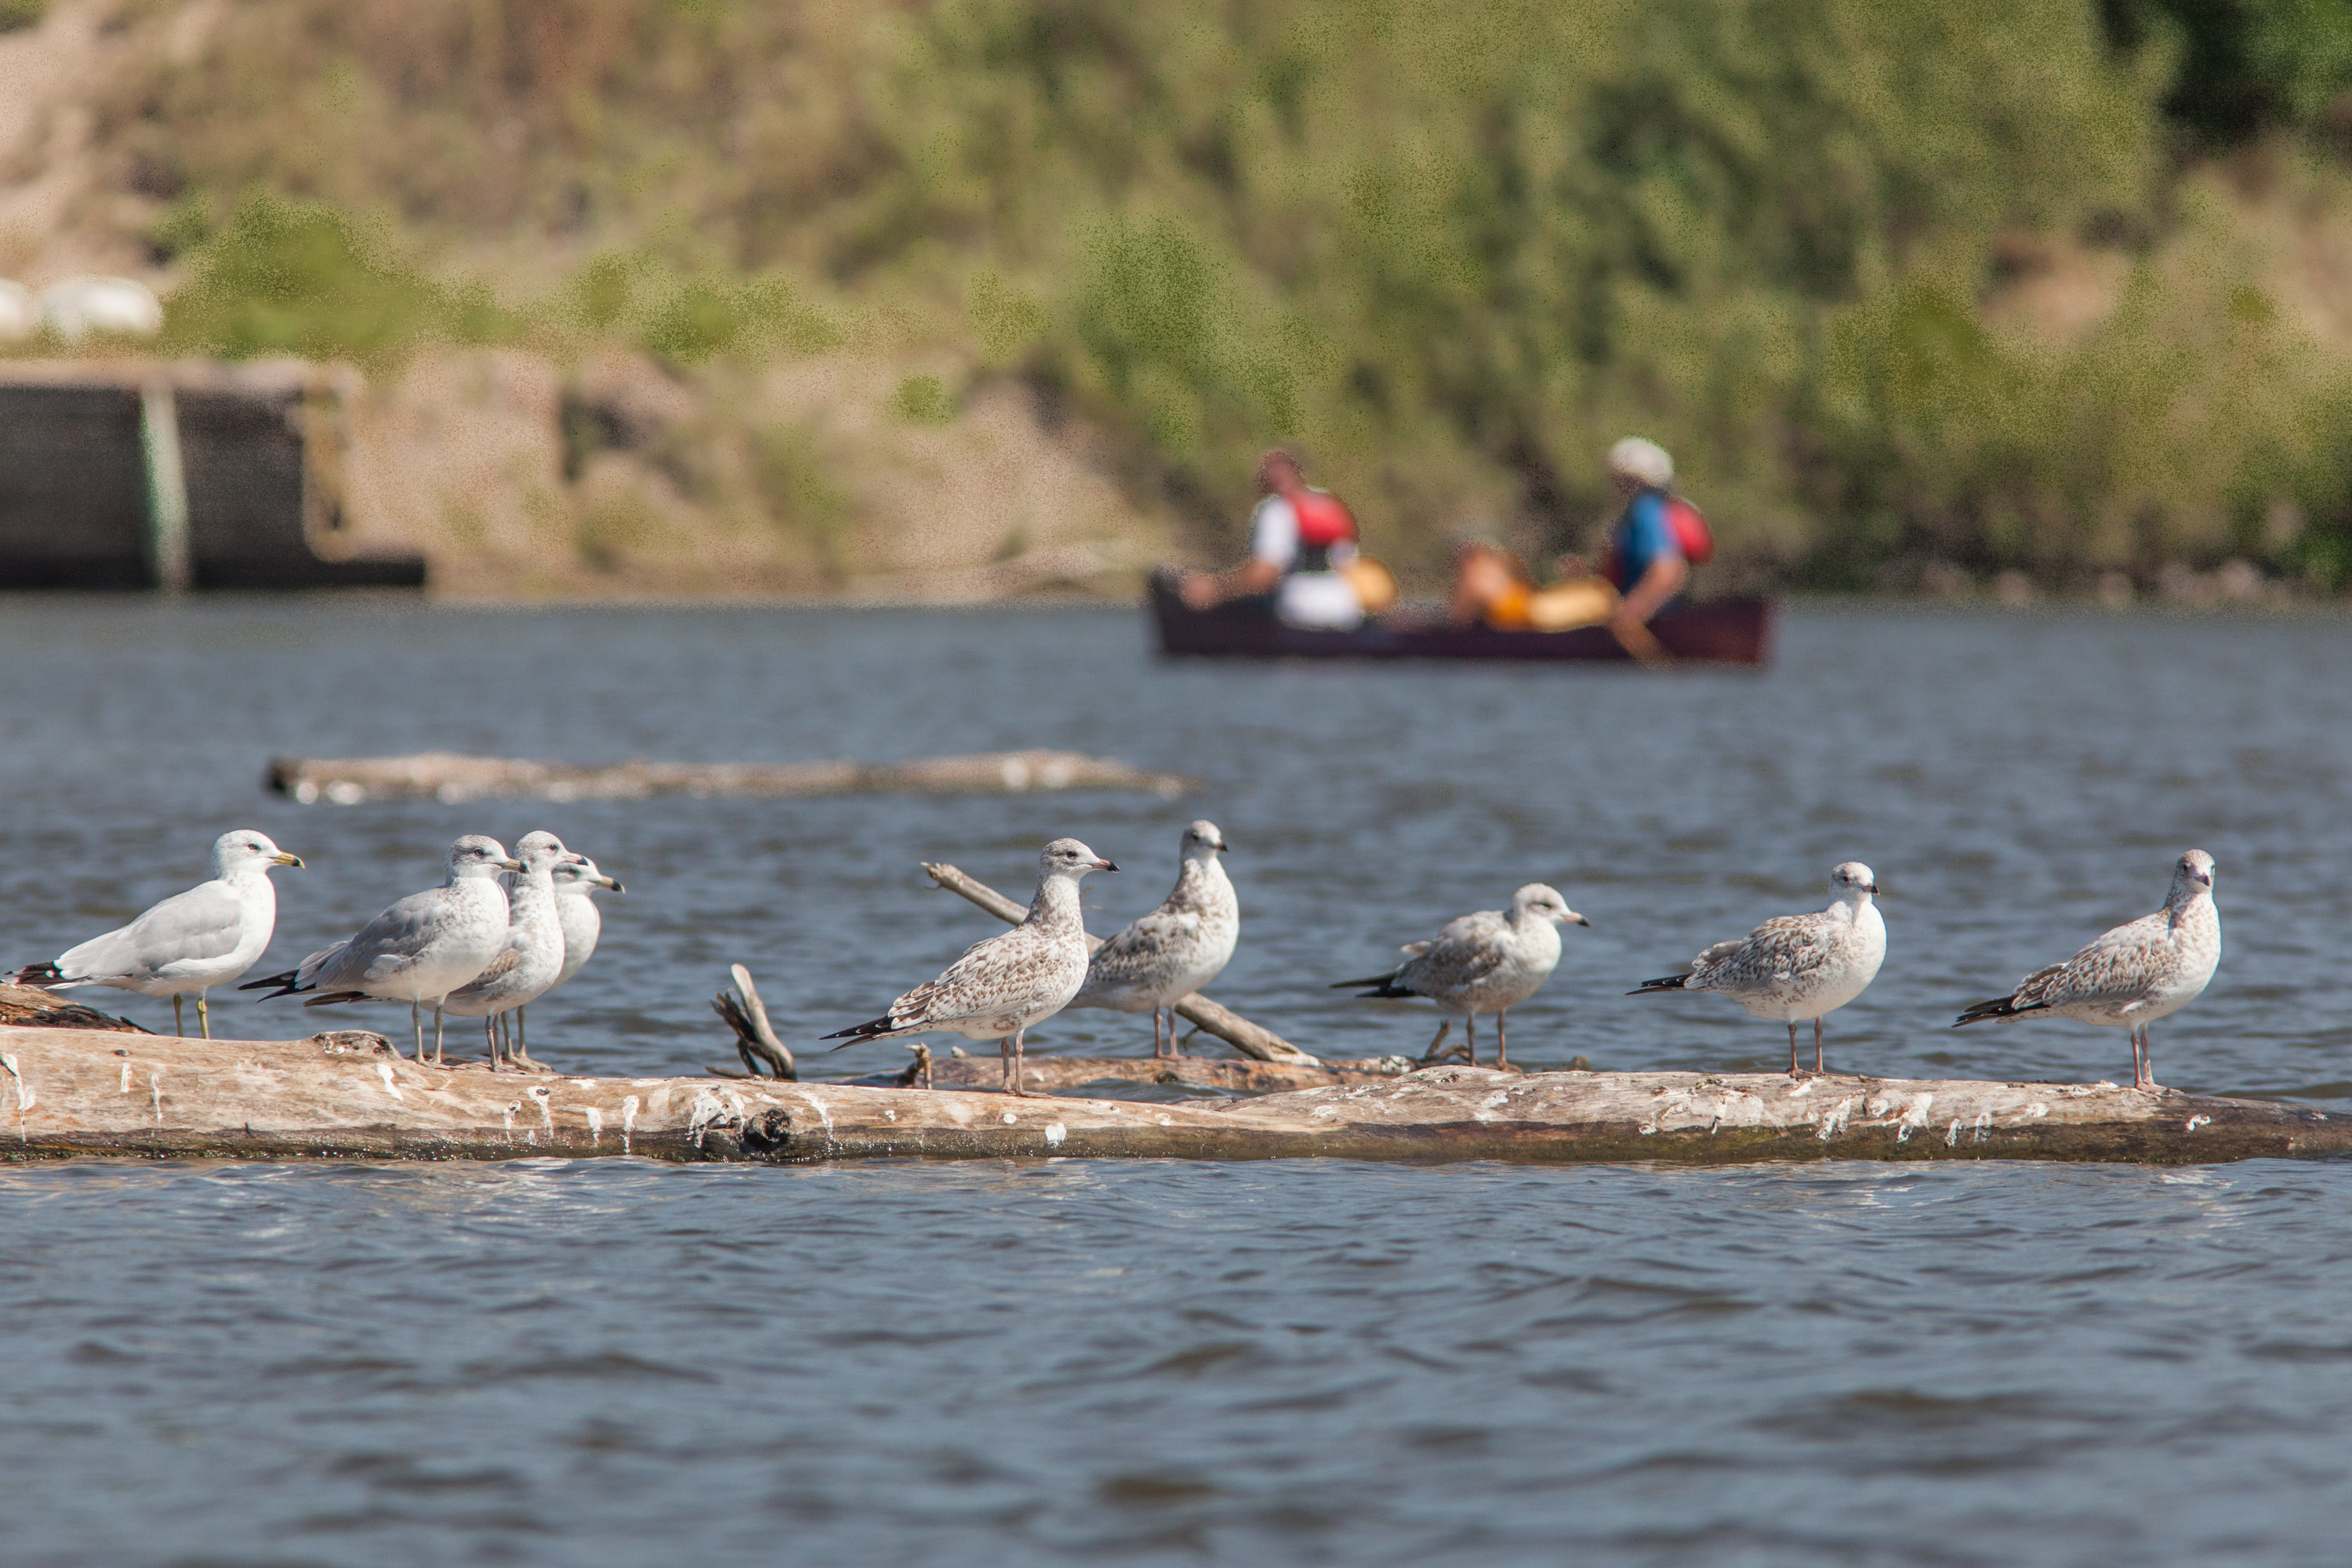 Gulls stand on a floating log while a canoe passes in the background.